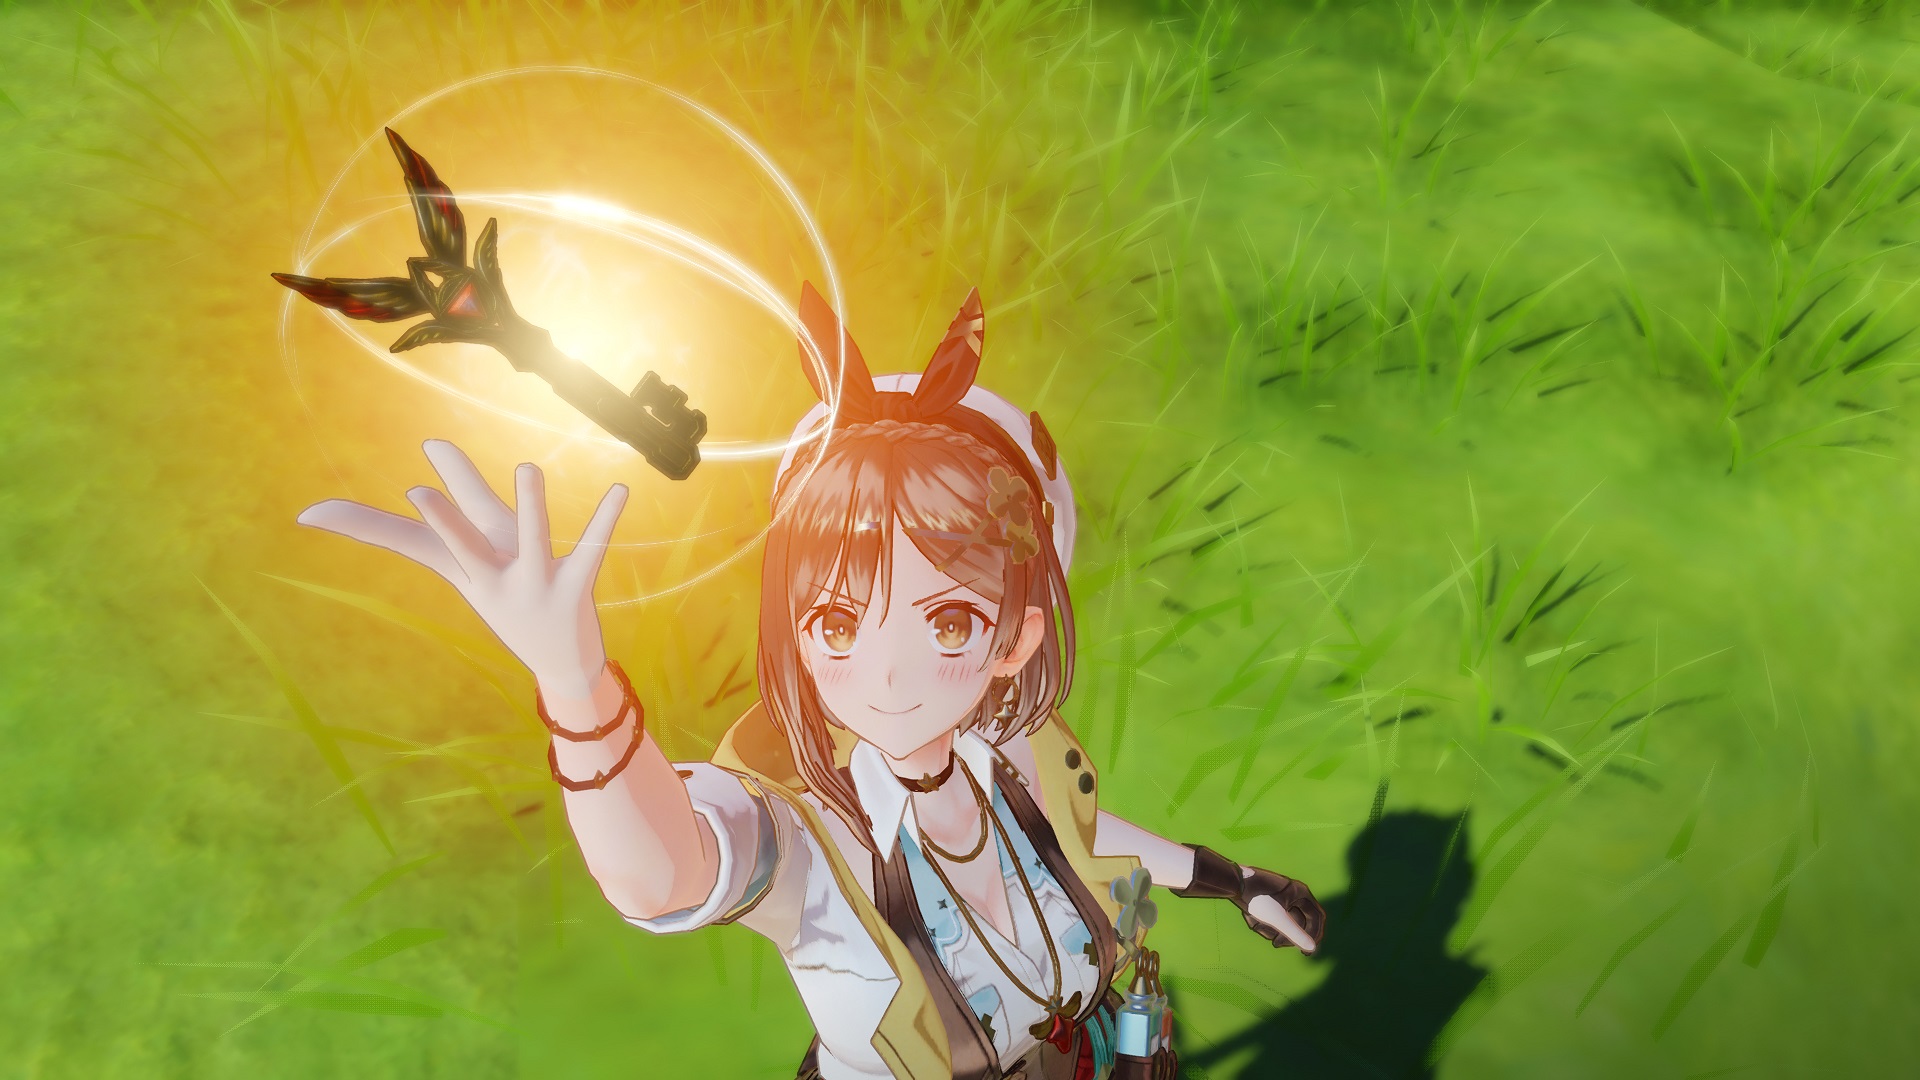 Atelier Ryza 3 details its improved synthesis mechanics and more